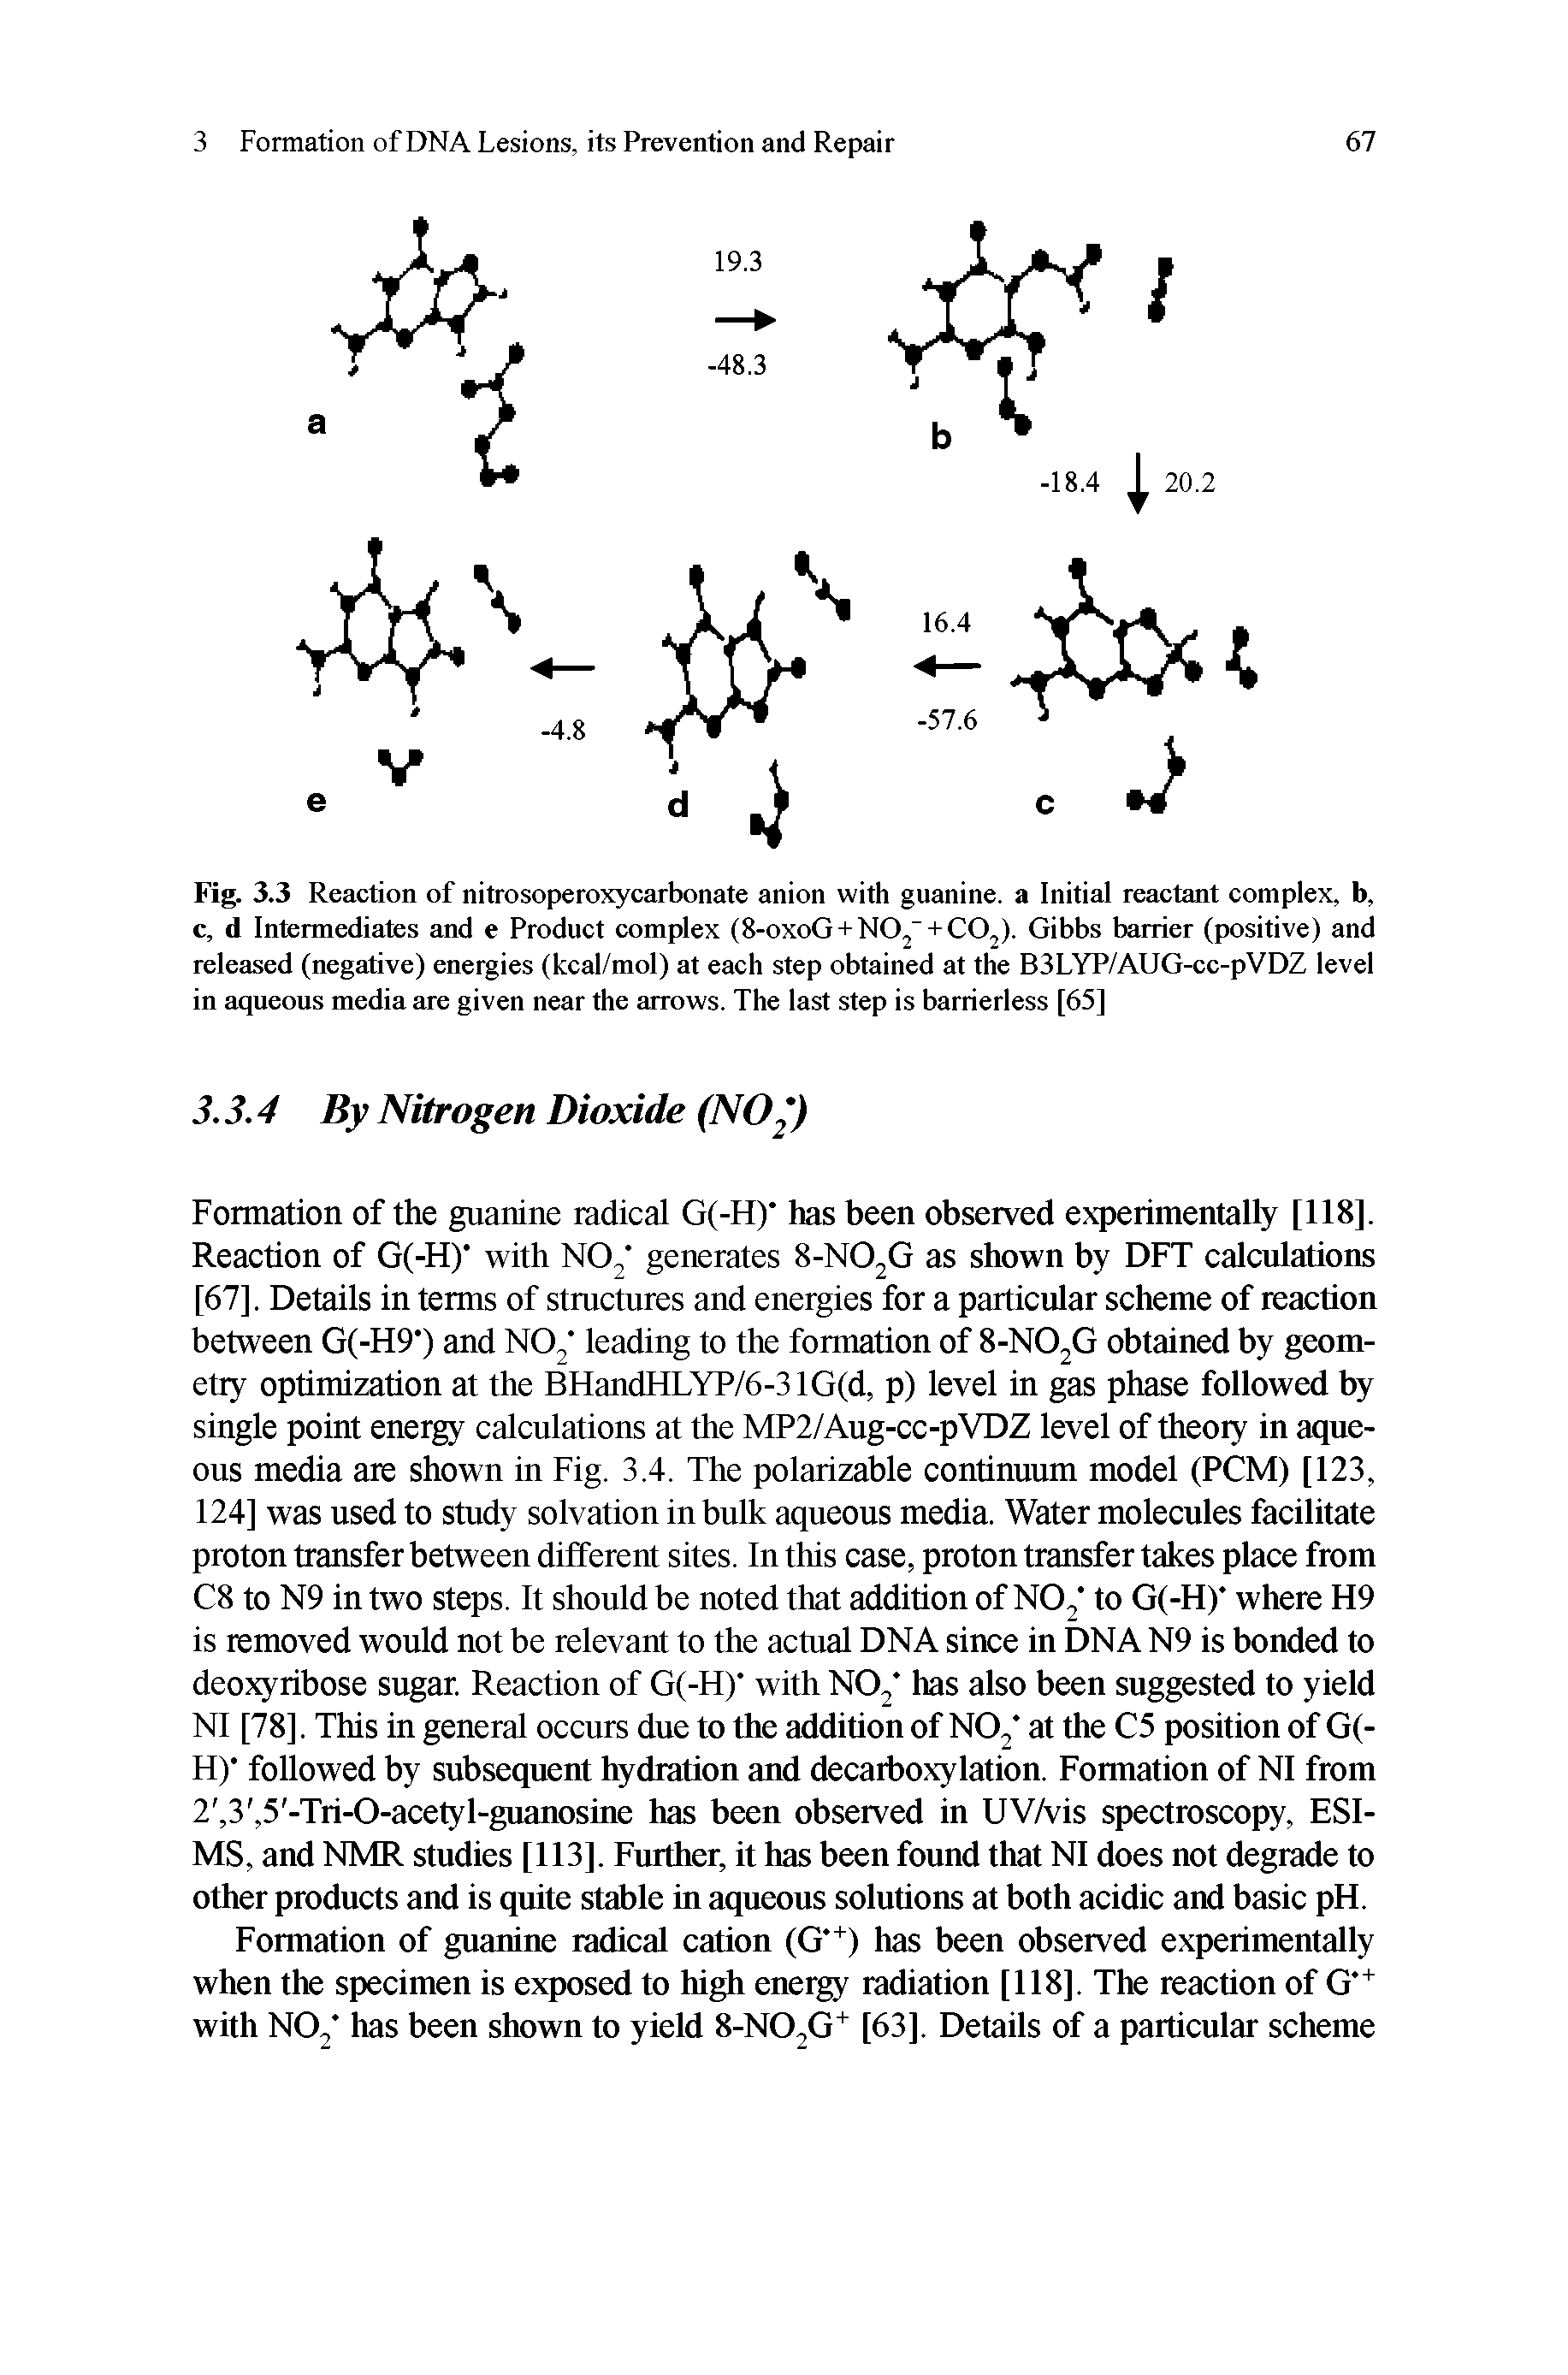 Fig. 3.3 Reaction of nitrosoperoxycarbonate anion with guanine, a Initial reactant complex, b, c, d Intermediates and e Product complex (S-oxoG + NO + COj). Gibbs barrier (positive) and released (negative) energies (kcal/mol) at each step obtained at the B3LYP/AUG-cc-pVDZ level in aqueous media are given near the arrows. The last step is barrierless [65]...